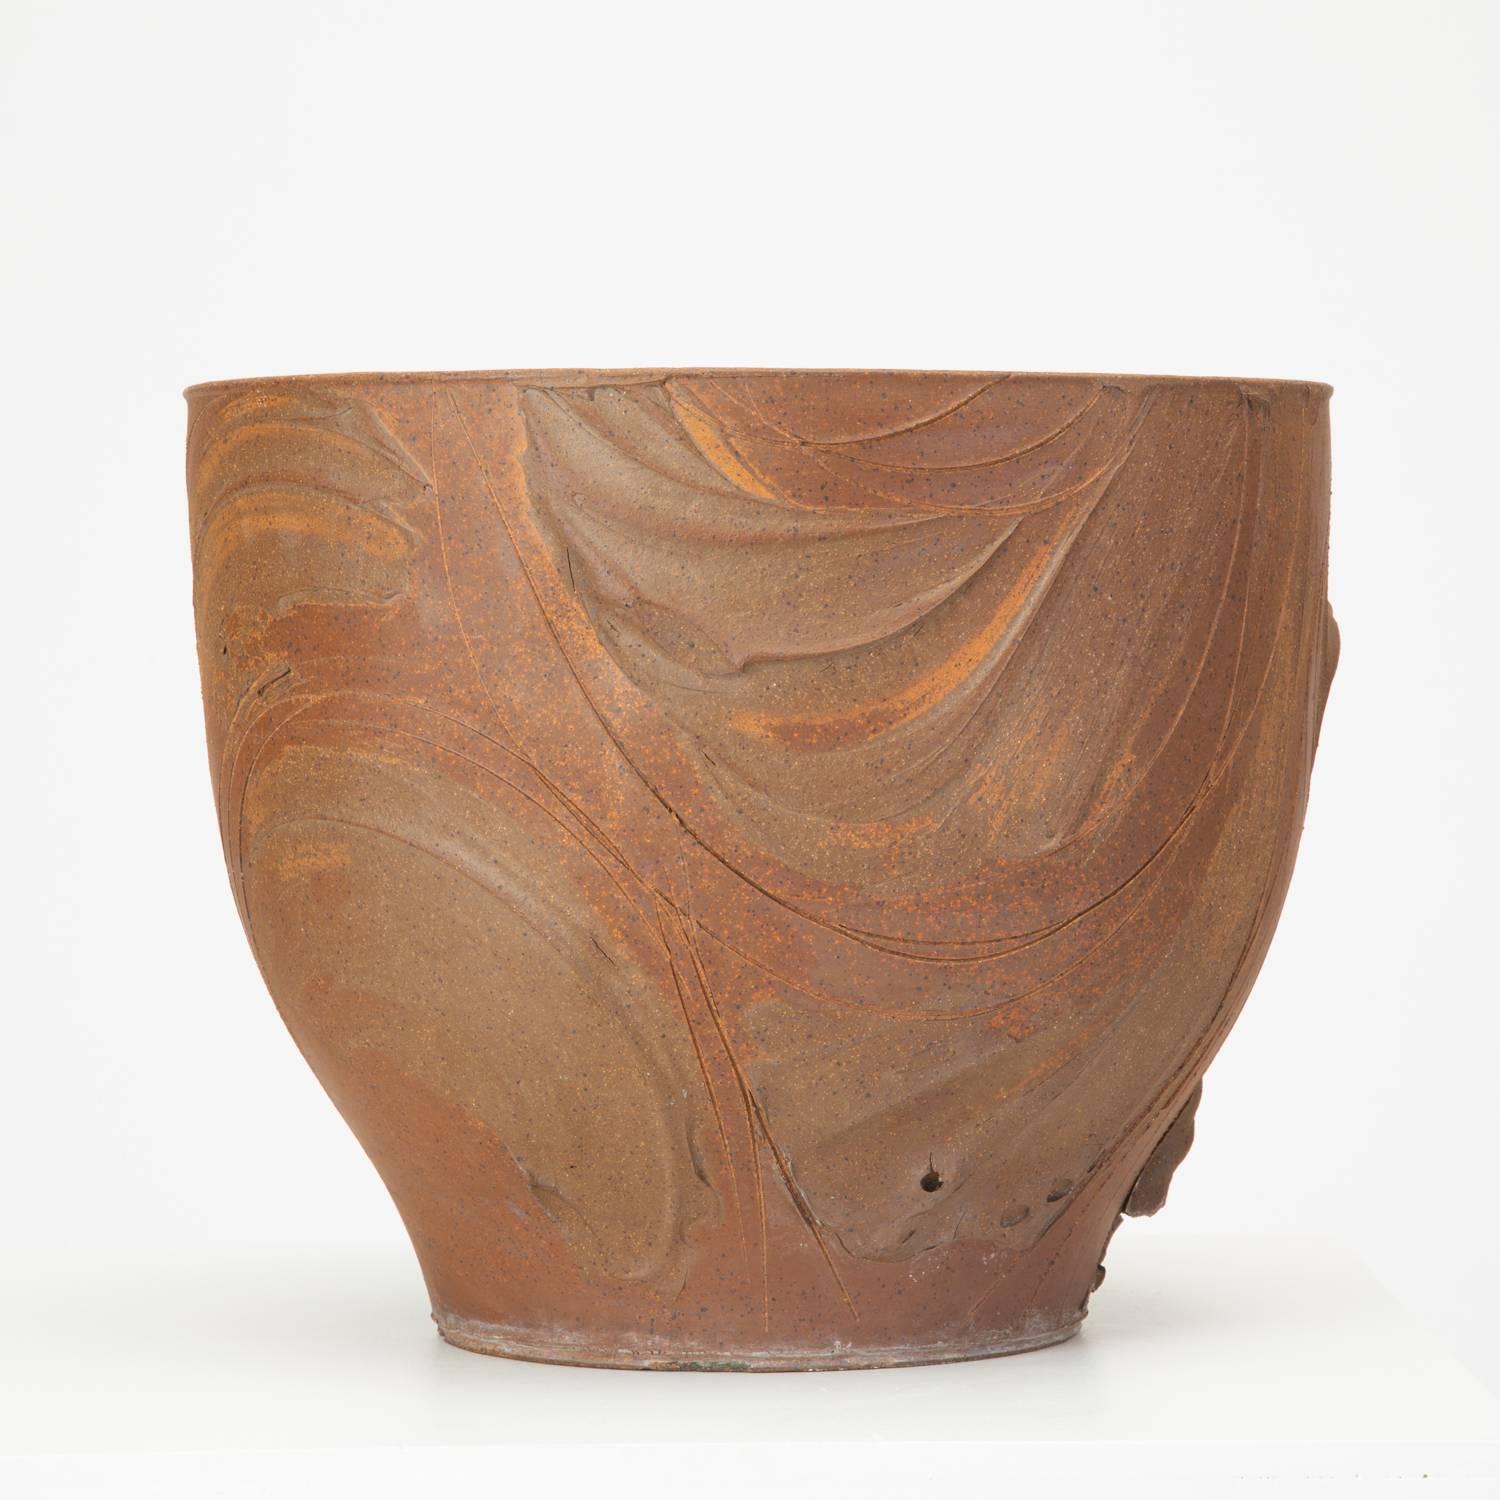 An unfinished spatter-glazed urn planter designed by David Cressey for Architectural Pottery's 1960s Pro/Artisan collection. The slip-cast piece has a bowl shape, tapering to a smaller foot and features painterly ridges and incisions in a rounded